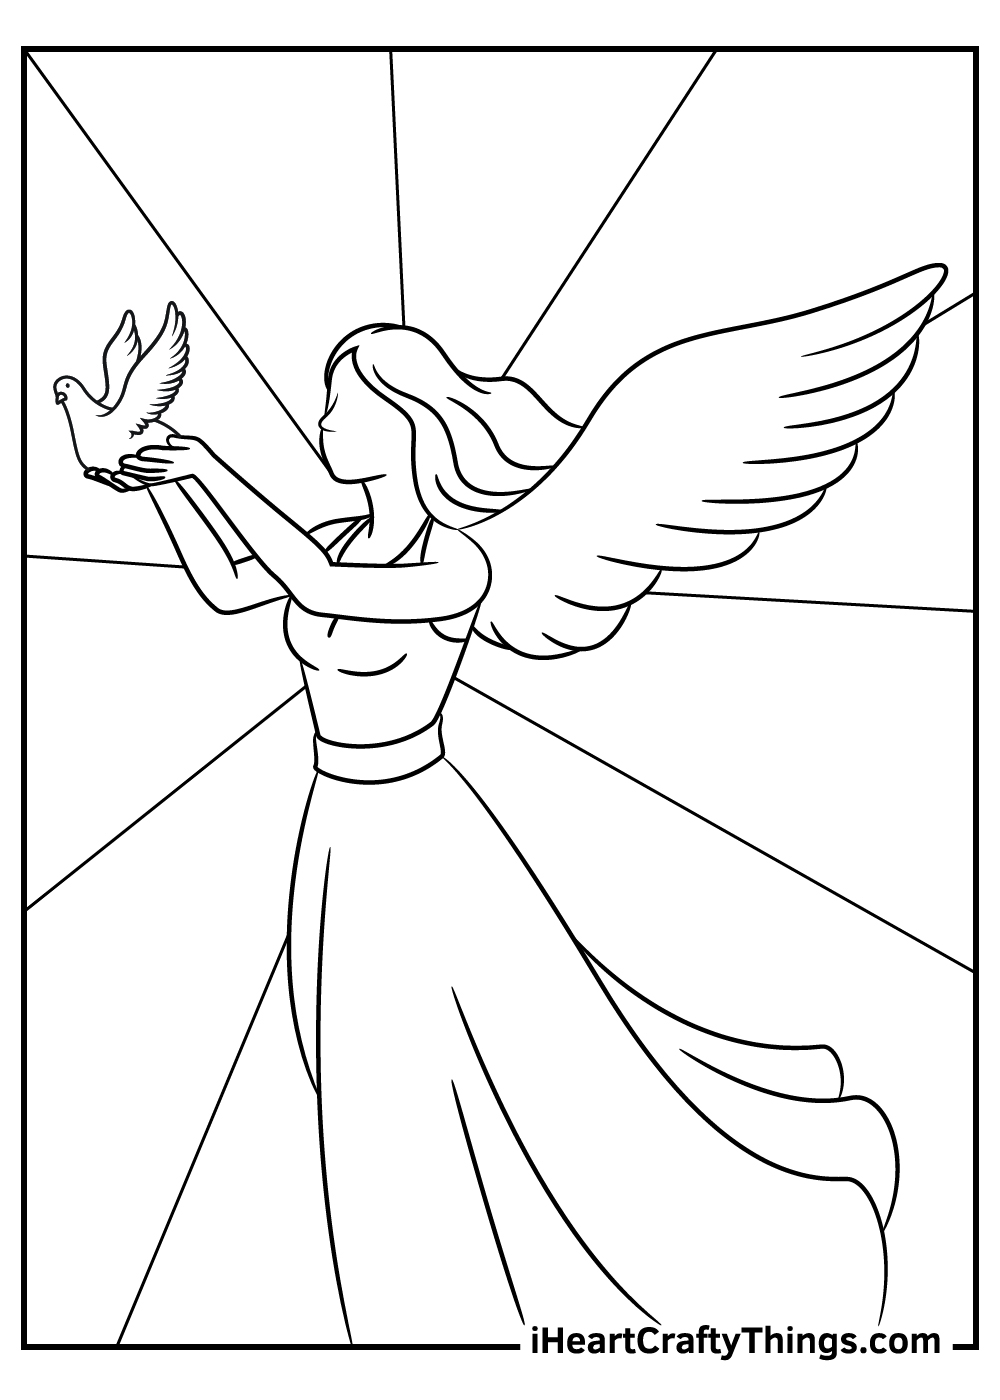 Angels Singing Coloring Pages Coloring Pages